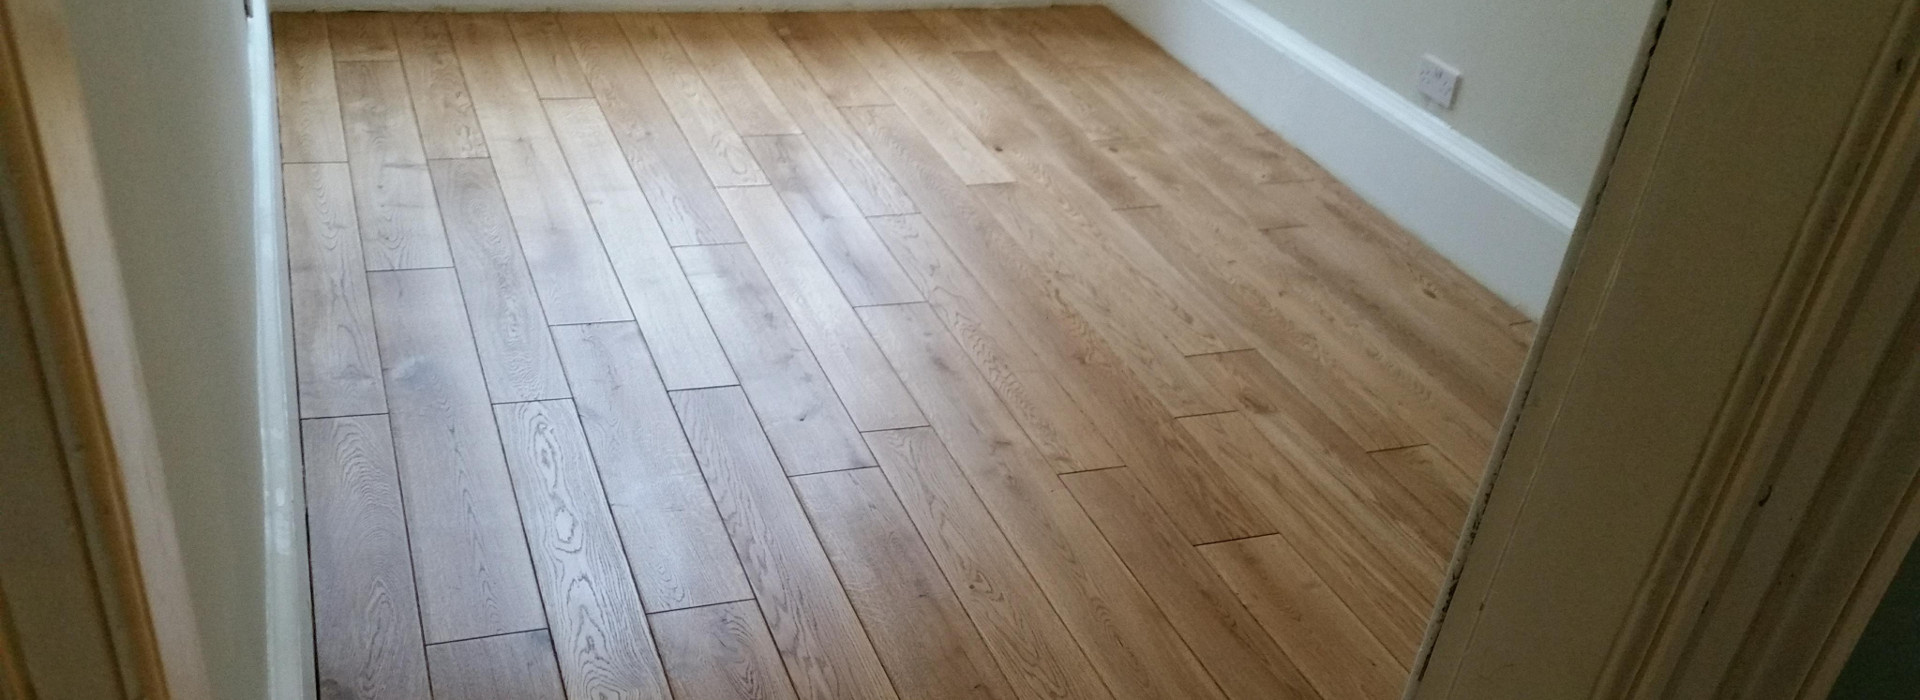 Use our quality Engineered wood flooring